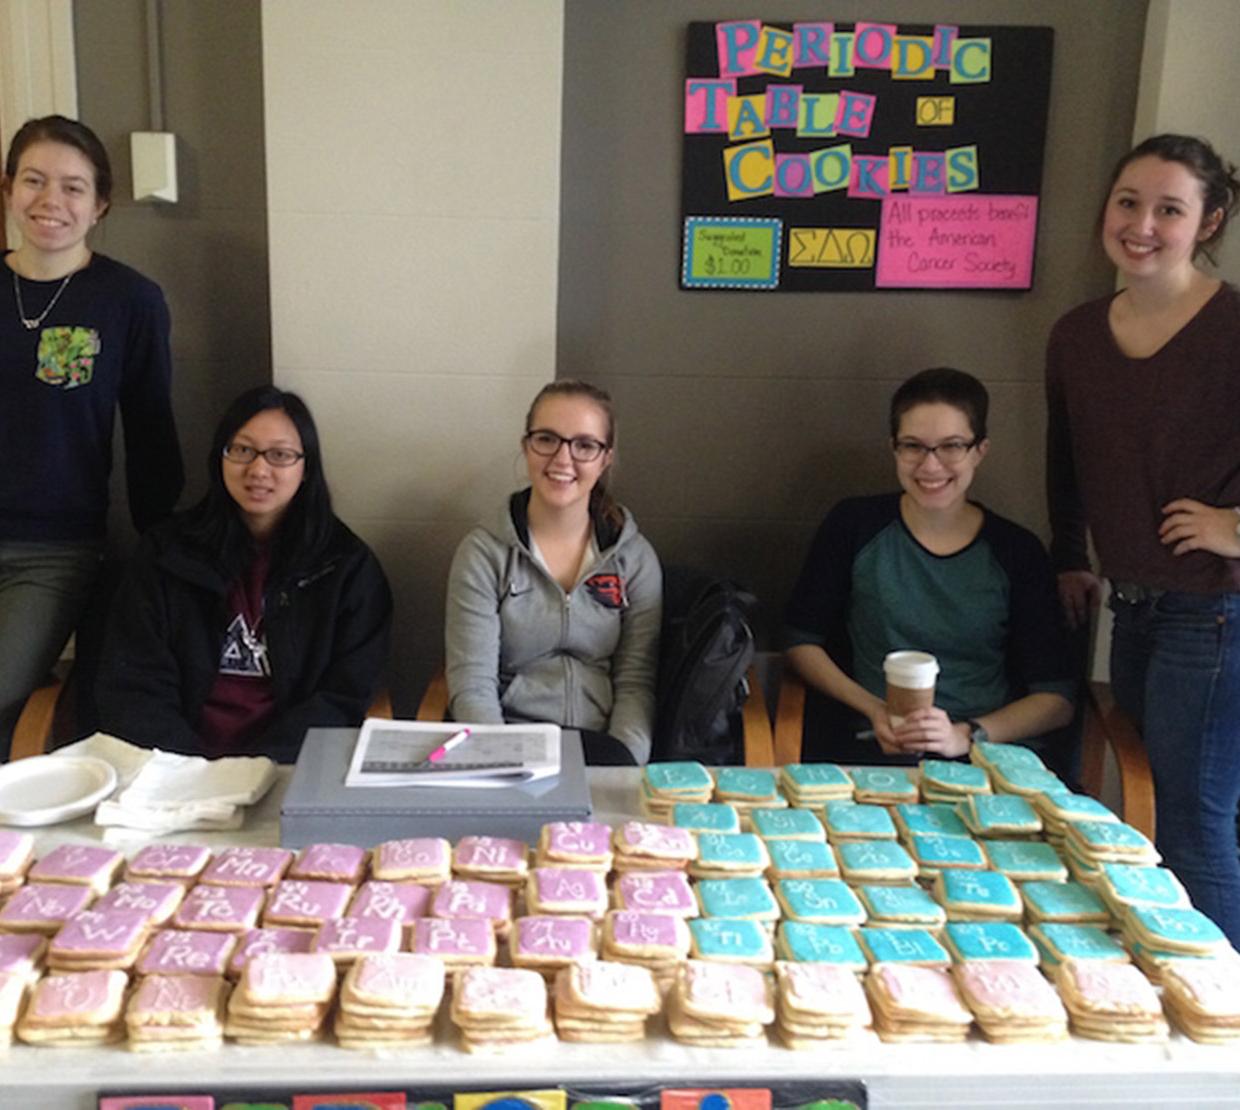 Sigma delta omega students selling cookies in Kidder